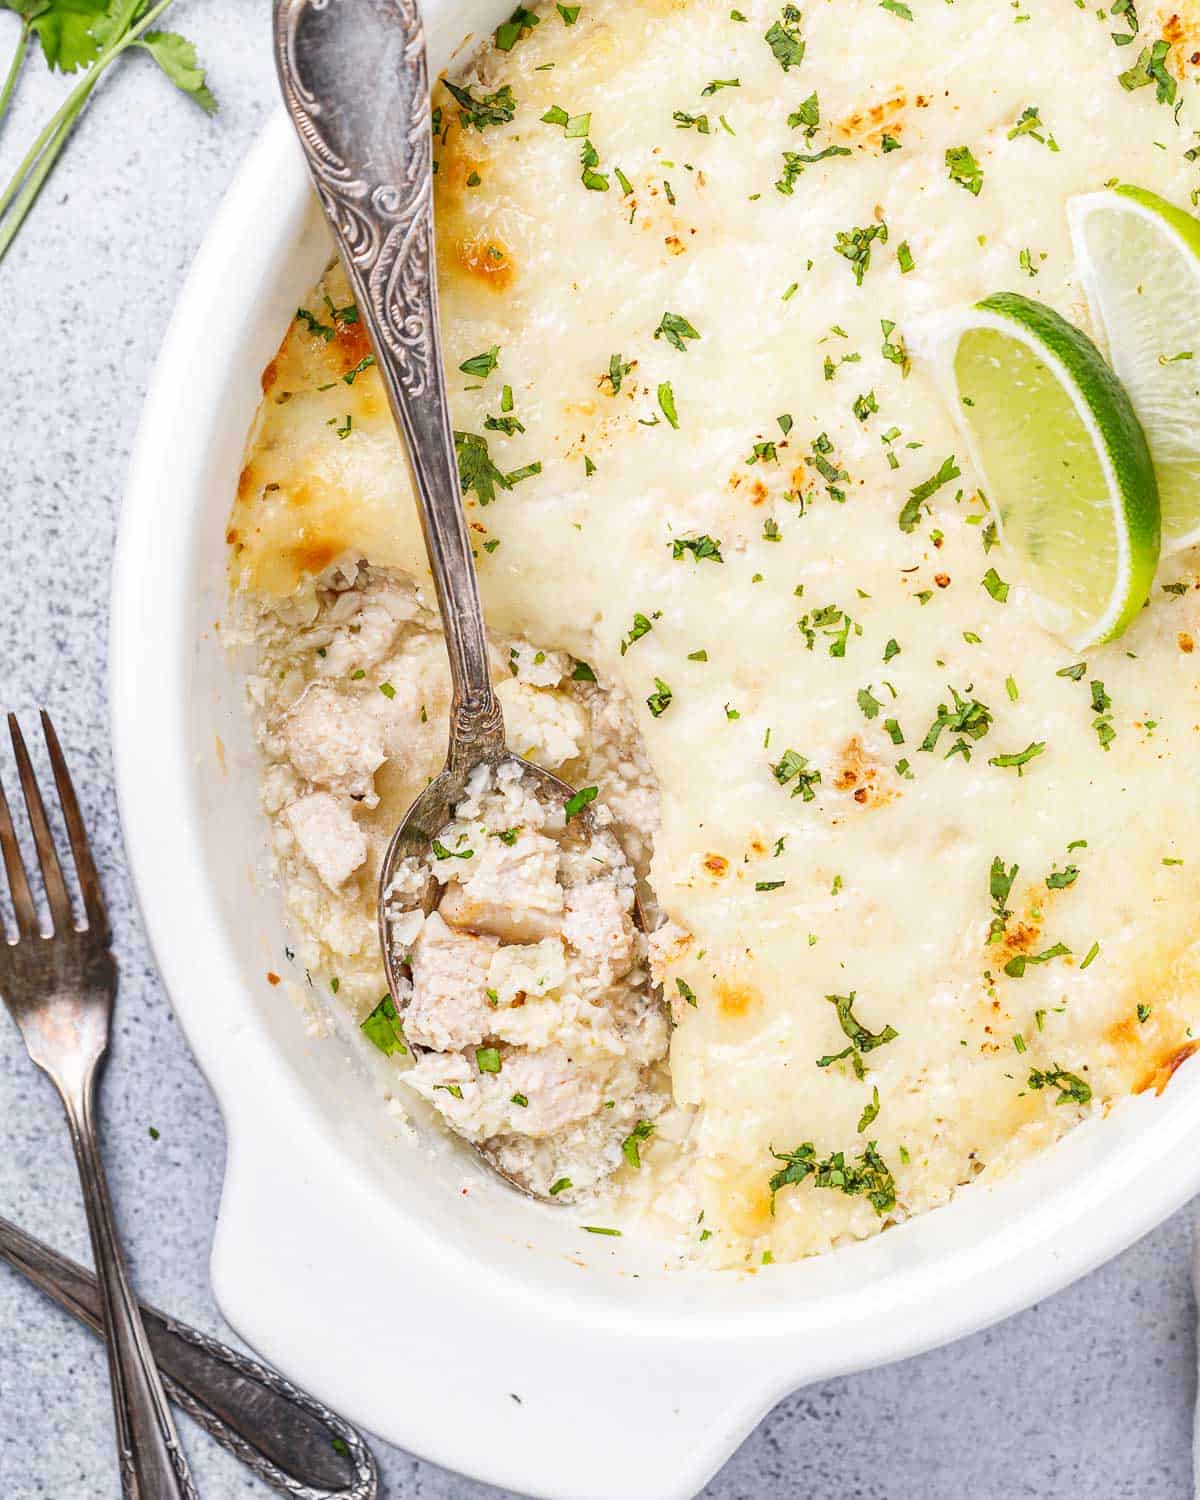 Spoon serving chicken cauliflower rice casserole out of a white baking dish.